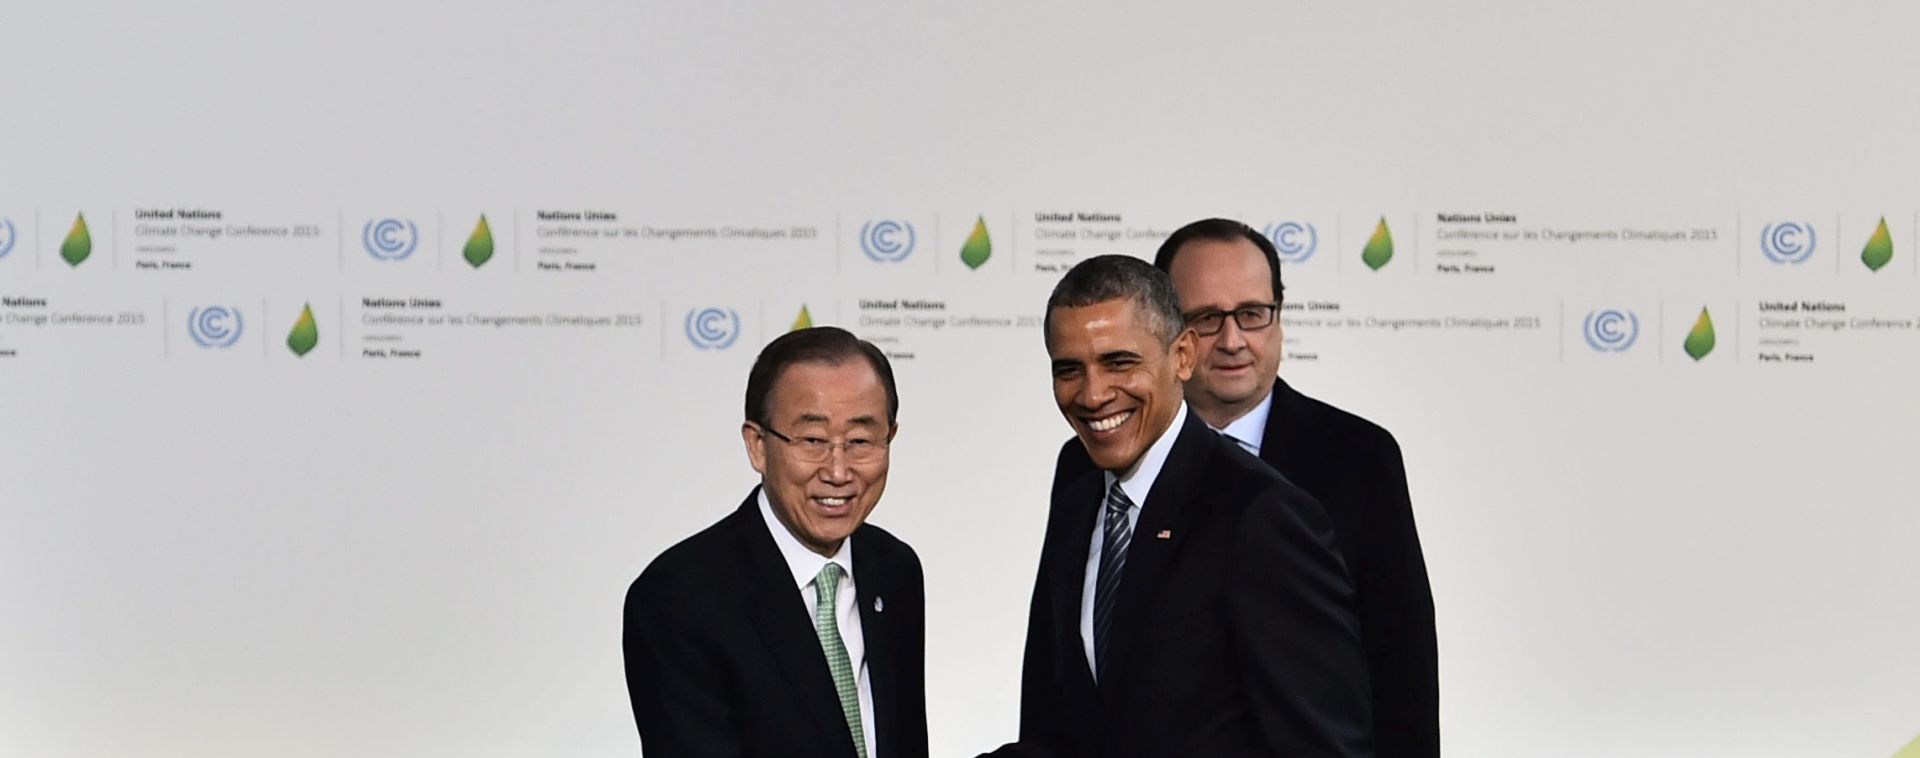 epa05048776 United Nations Secretary General Ban Ki-moon (2-R) shakes hands with US President Barack Obama (2-R) as French president Francois Hollande (R) looks on as Obama arrives for the COP21 World Climate Change Conference 2015 in Le Bourget, north of Paris, France, 30 November 2015. Watching the scene are Executive Secretary of the UN Framework Convention on Climate Change Christiana Figueres (3-L) French Foreign Affairs Minister Laurent Fabius (2-L) and French Minister for Ecology, Sustainable Development and Energy, Segolene Royal (L). The 21st Conference of the Parties (COP21) is held in Paris from 30 November to 11 December aimed at reaching an international agreement to limit greenhouse gas emissions and curtail climate change.  EPA/LOIC VENANCE / POOL MAXPPP OUT